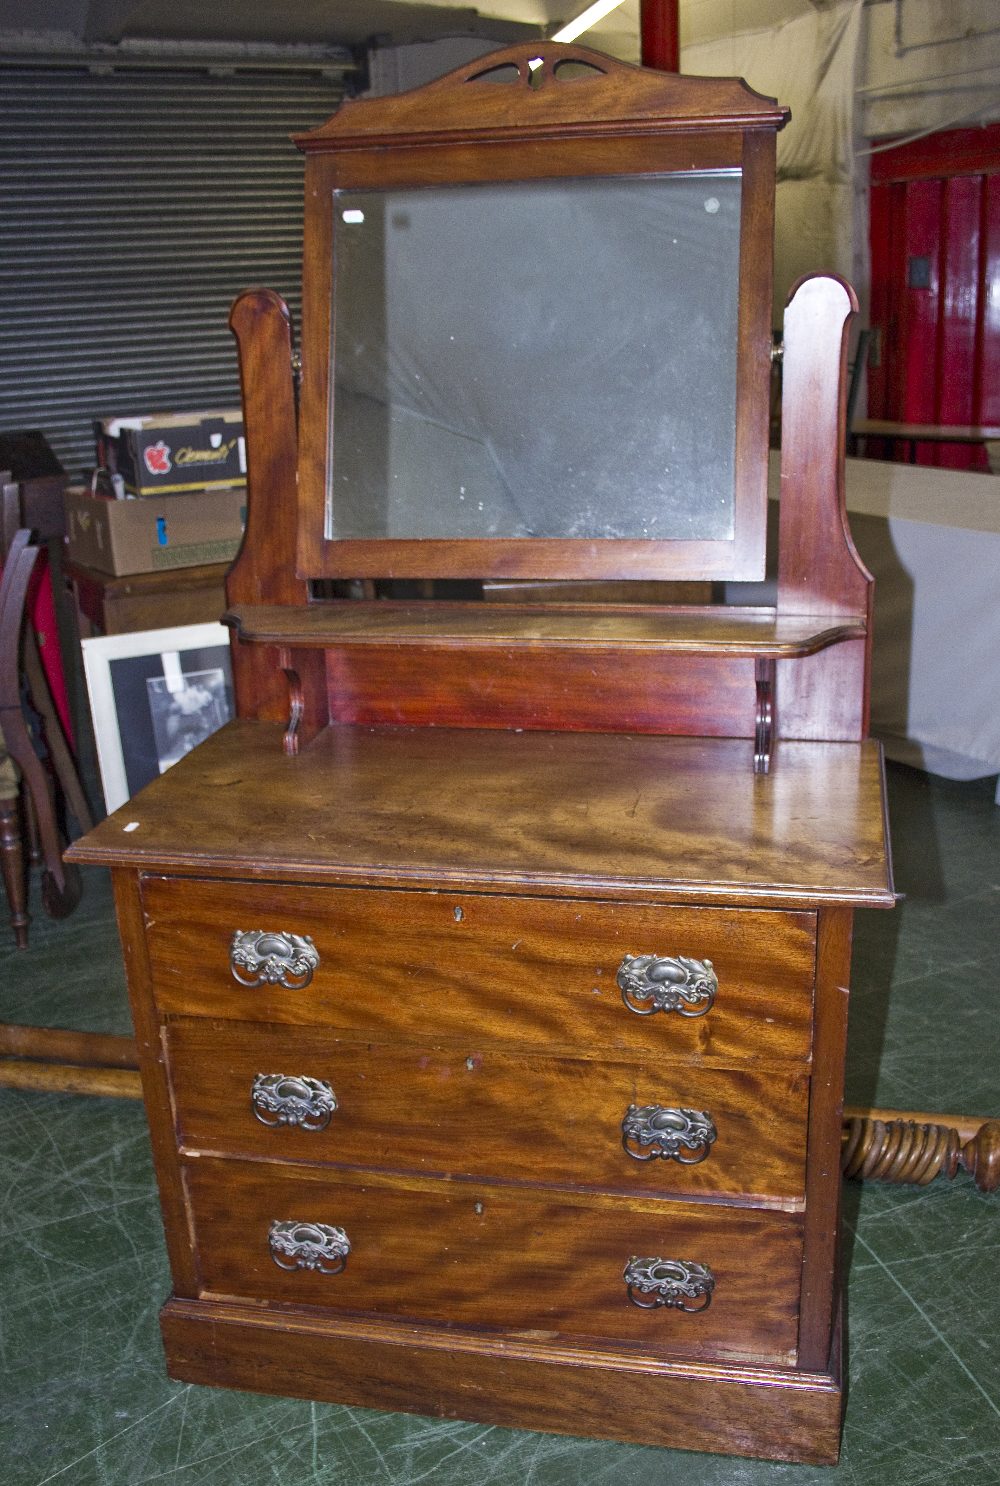 An Edwardian dressing chest with mirror.